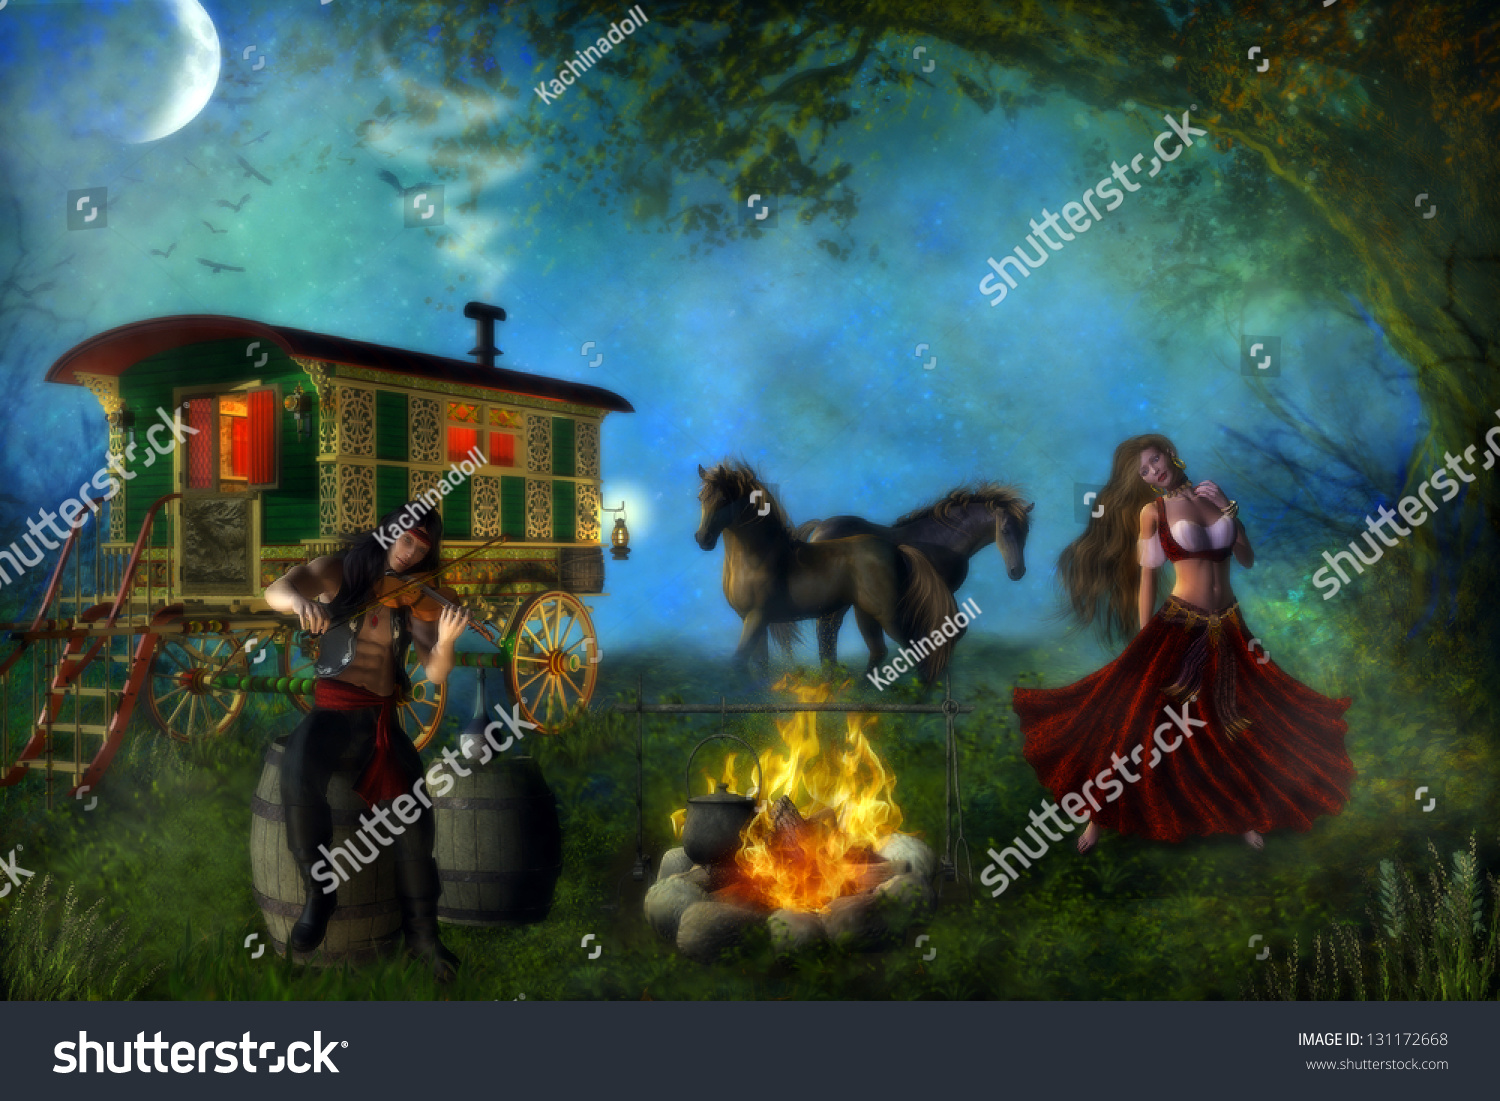 Image result for horse dancing with gypsies